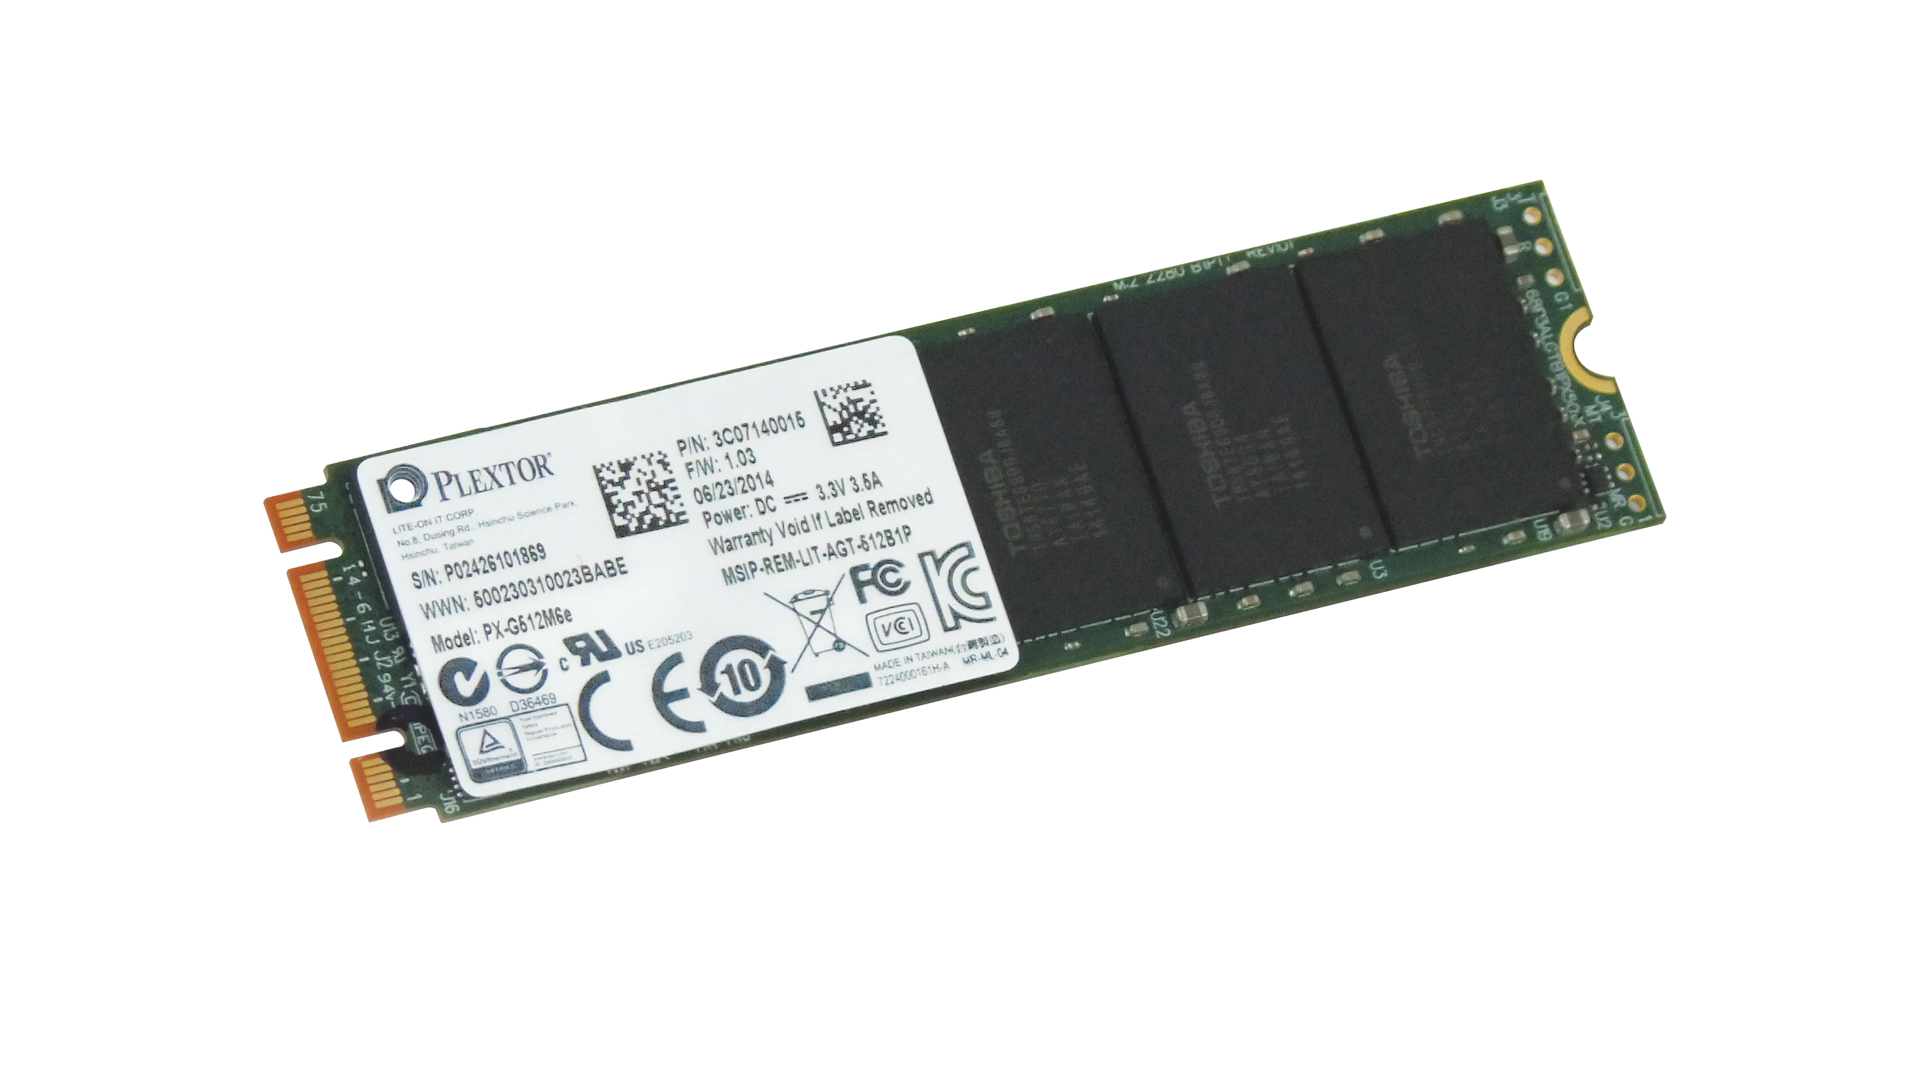 SSD into a spare PCIe slot, but is faster? | Gamer